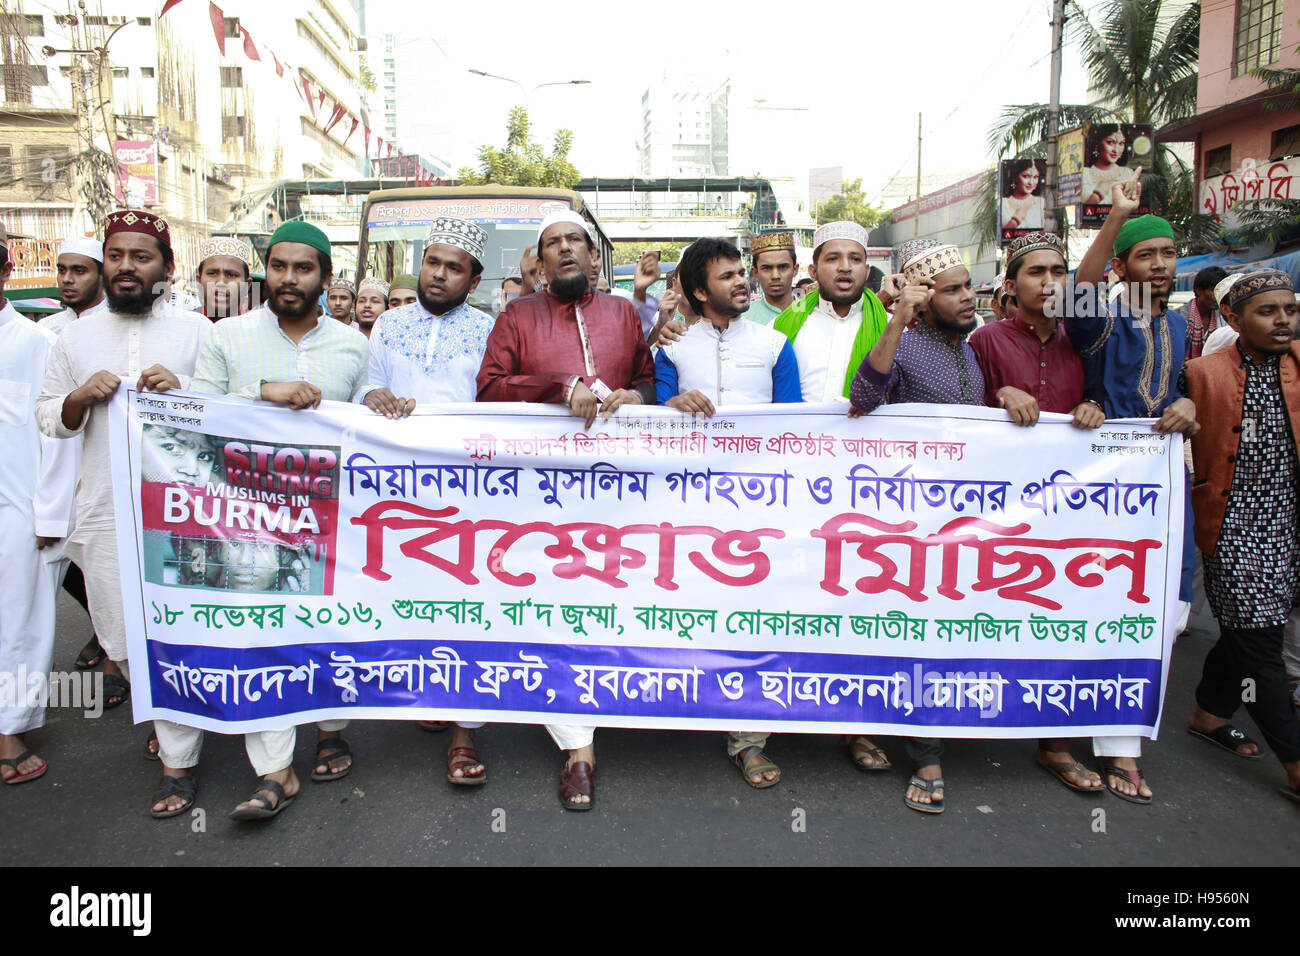 Dhaka, Bangladesh. 18th Nov, 2016. Several Bangladeshi Islamic party organize a demonstration in front of Baitul Mukkaram National mosque against the recent attack on Muslim Rohingya community at Mayanmar. November 18, 2016. According to Human Rights Watch - hundreds of homes have been destroyed in multiple villages amid an ongoing crackdown by the Burmese military. Authorities of Bangladesh said dozens of people have attempted to flee across the border in recent days. A total of 130 people have been killed in the latest surge of violence in the country, according to the Myanmar army. (C Stock Photo